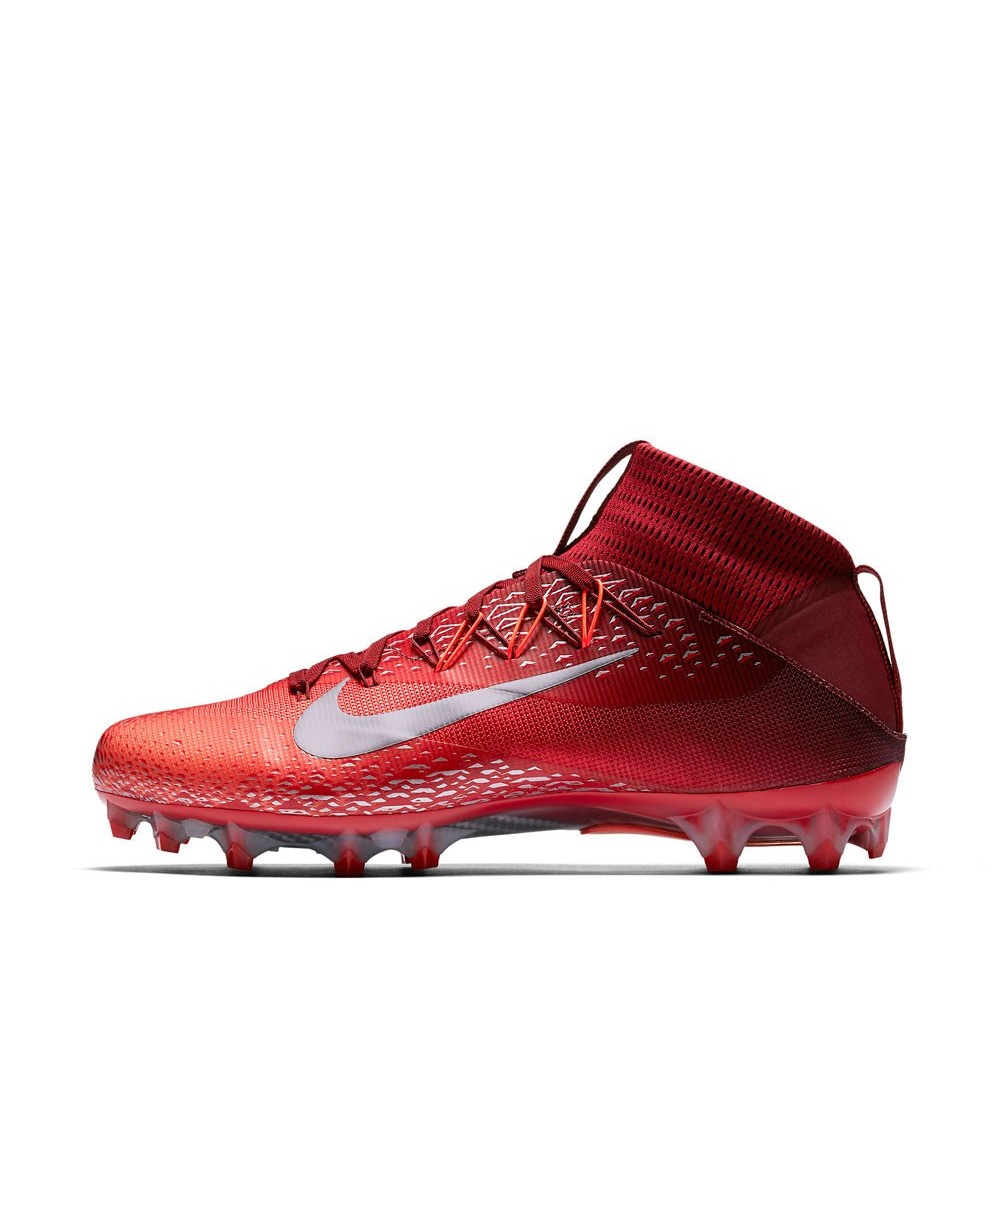 nike football shoes without spikes